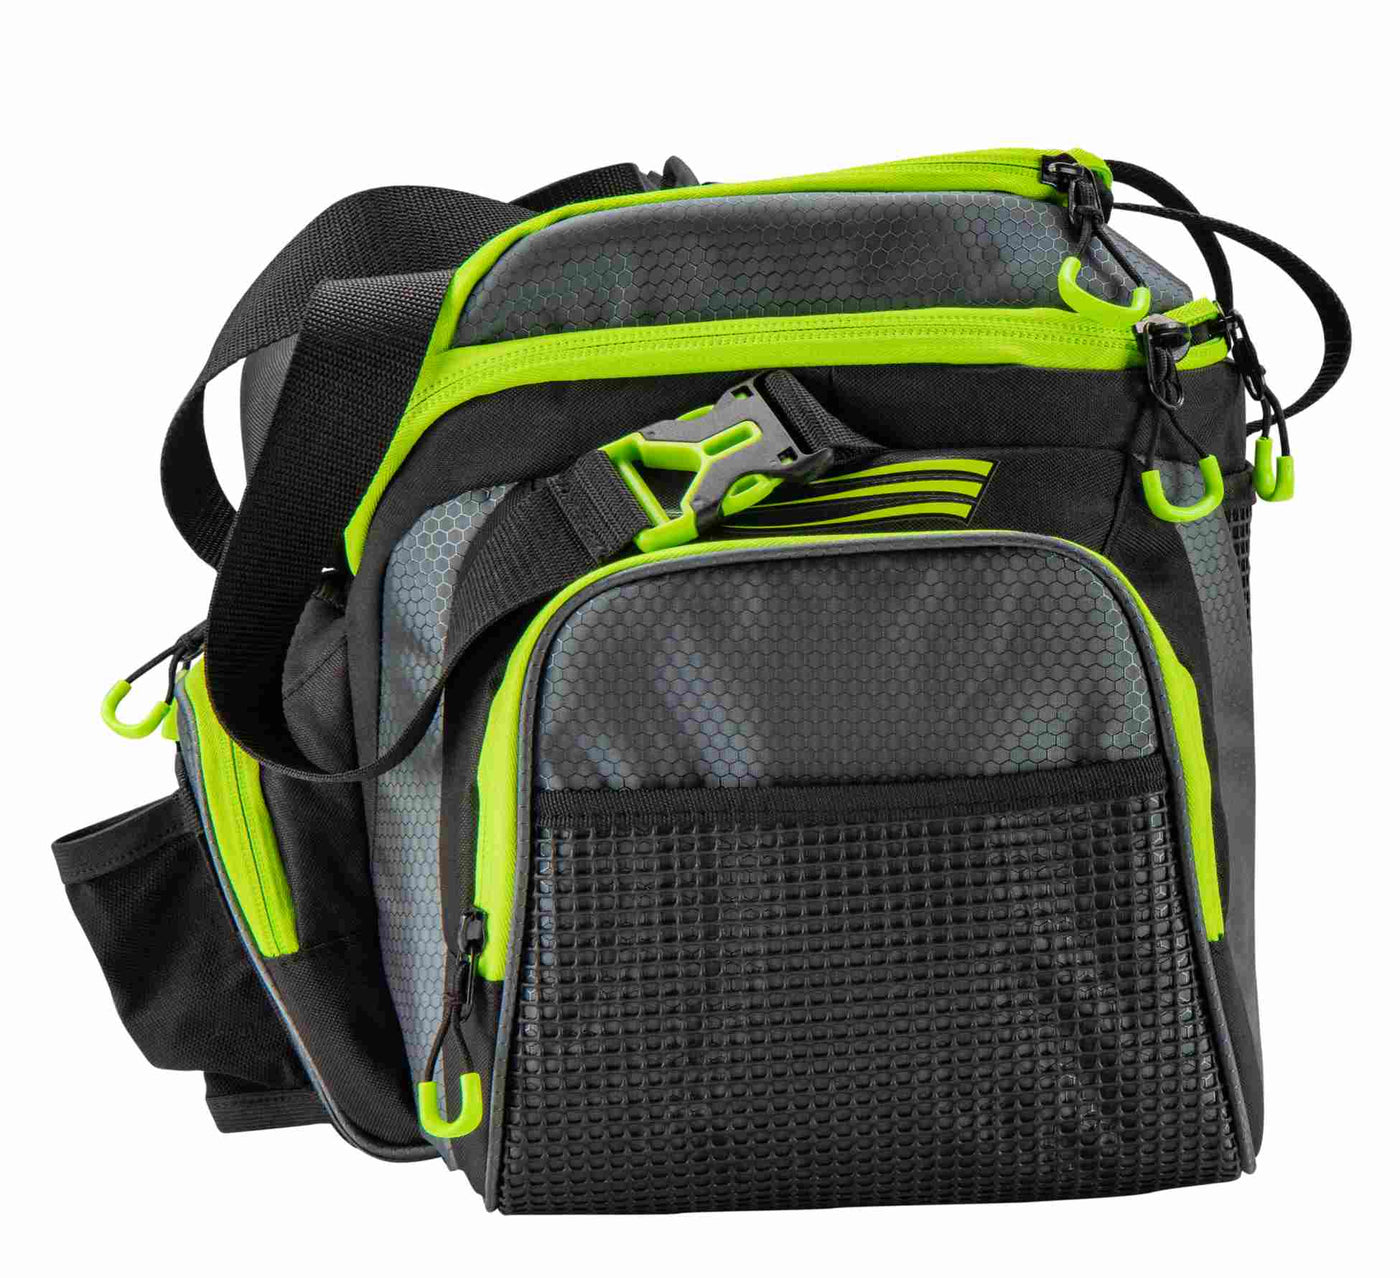 Side view of Lew's Mach fishing tackle bag in green and black